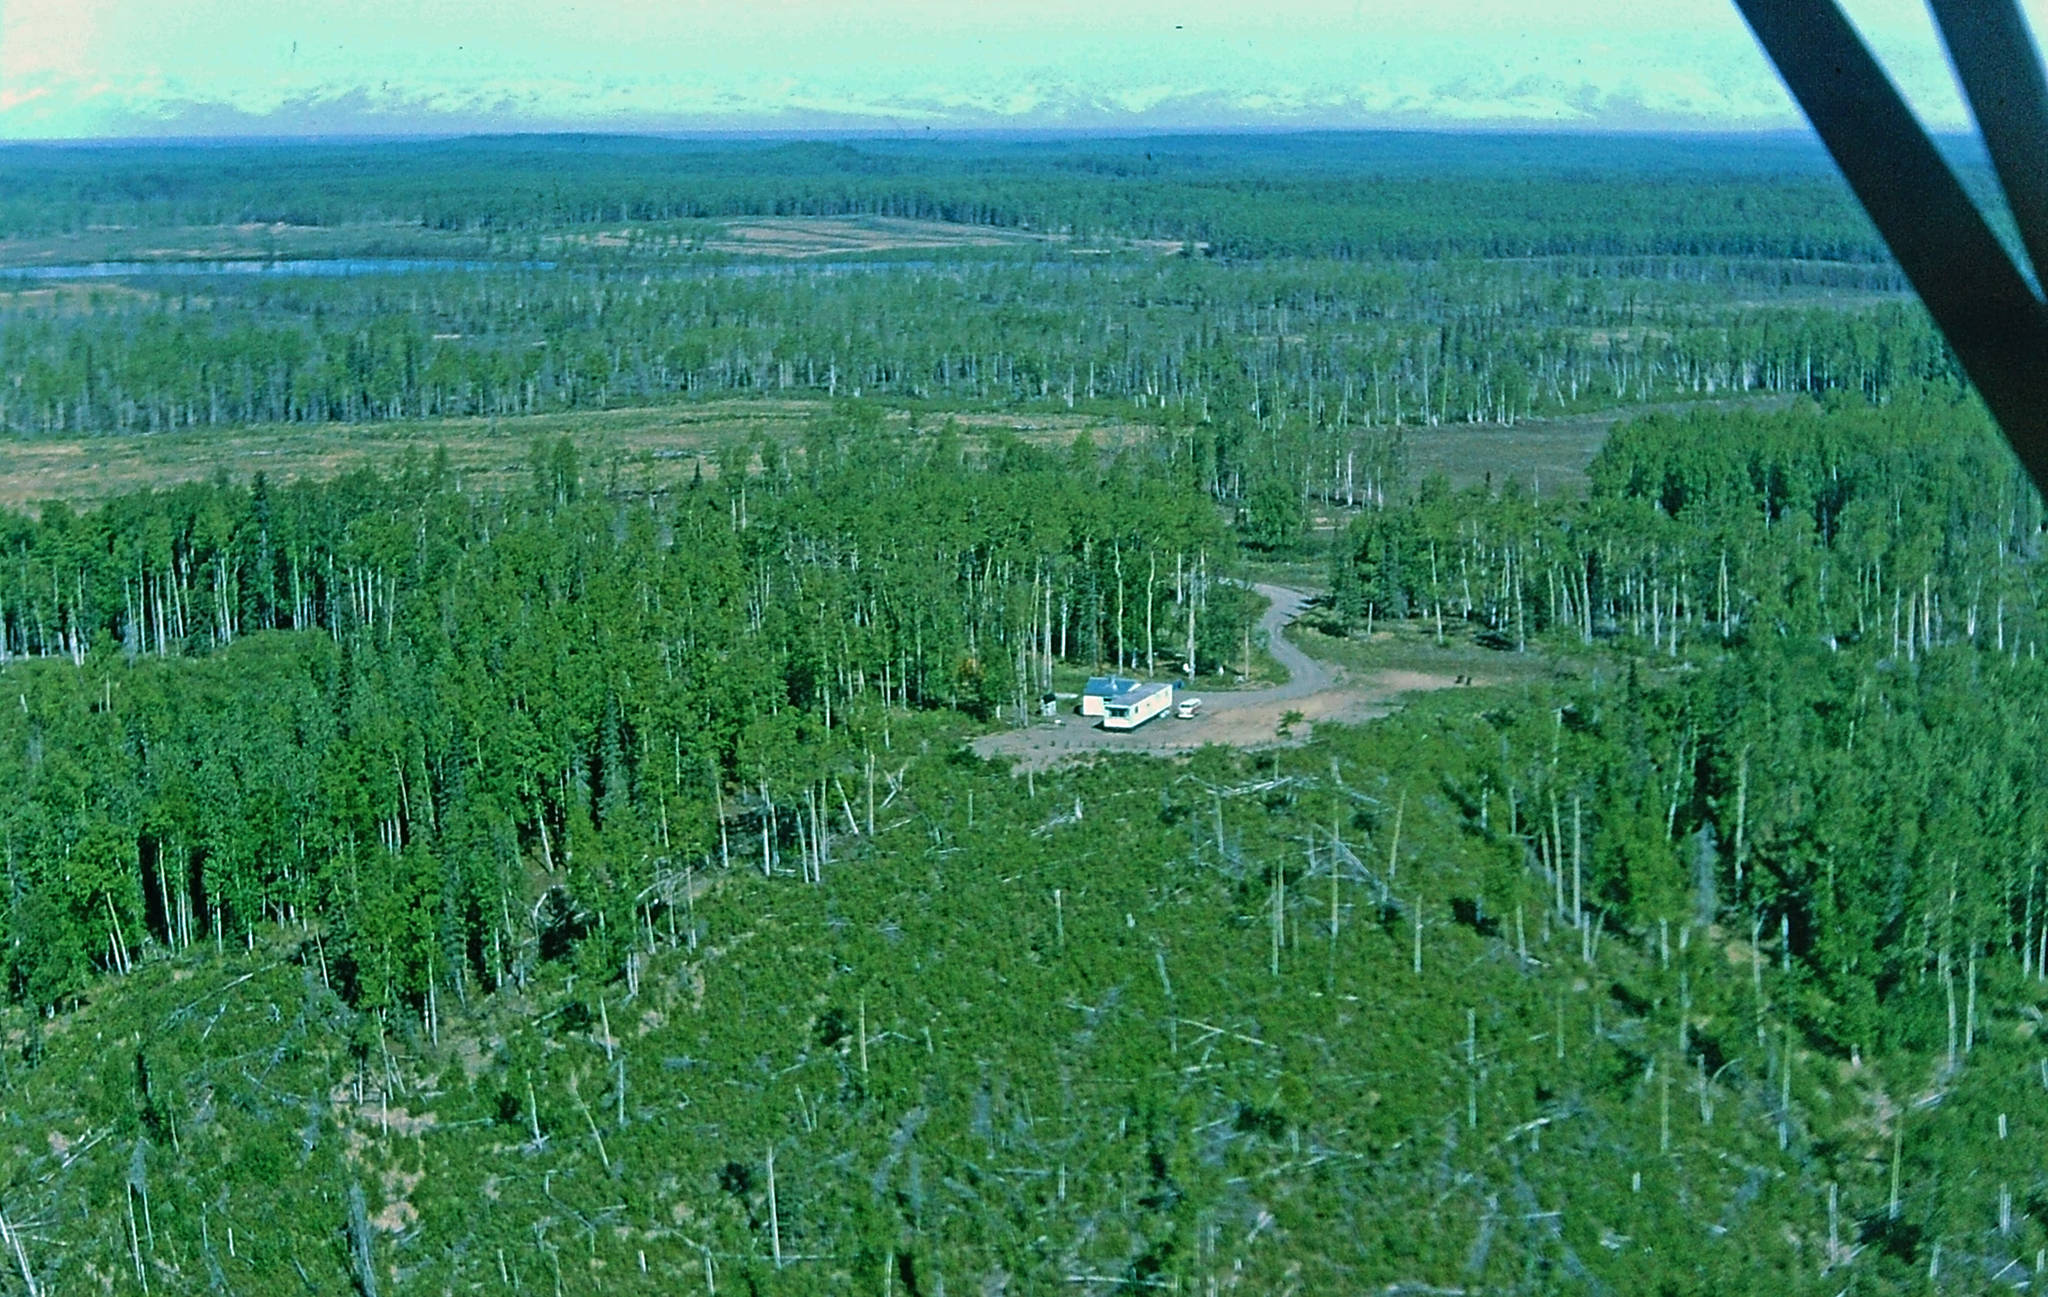 In 1964, two years after the Fairs moved to their homestead at the end of Forest Lane, Calvin Fair took this photo from neighbor Dan France’s SuperCub. Note the dearth of large trees in the foreground, where the 1947 Kenai Burn wiped out much of the hillside forest. (Courtesy Fair Family Collection.